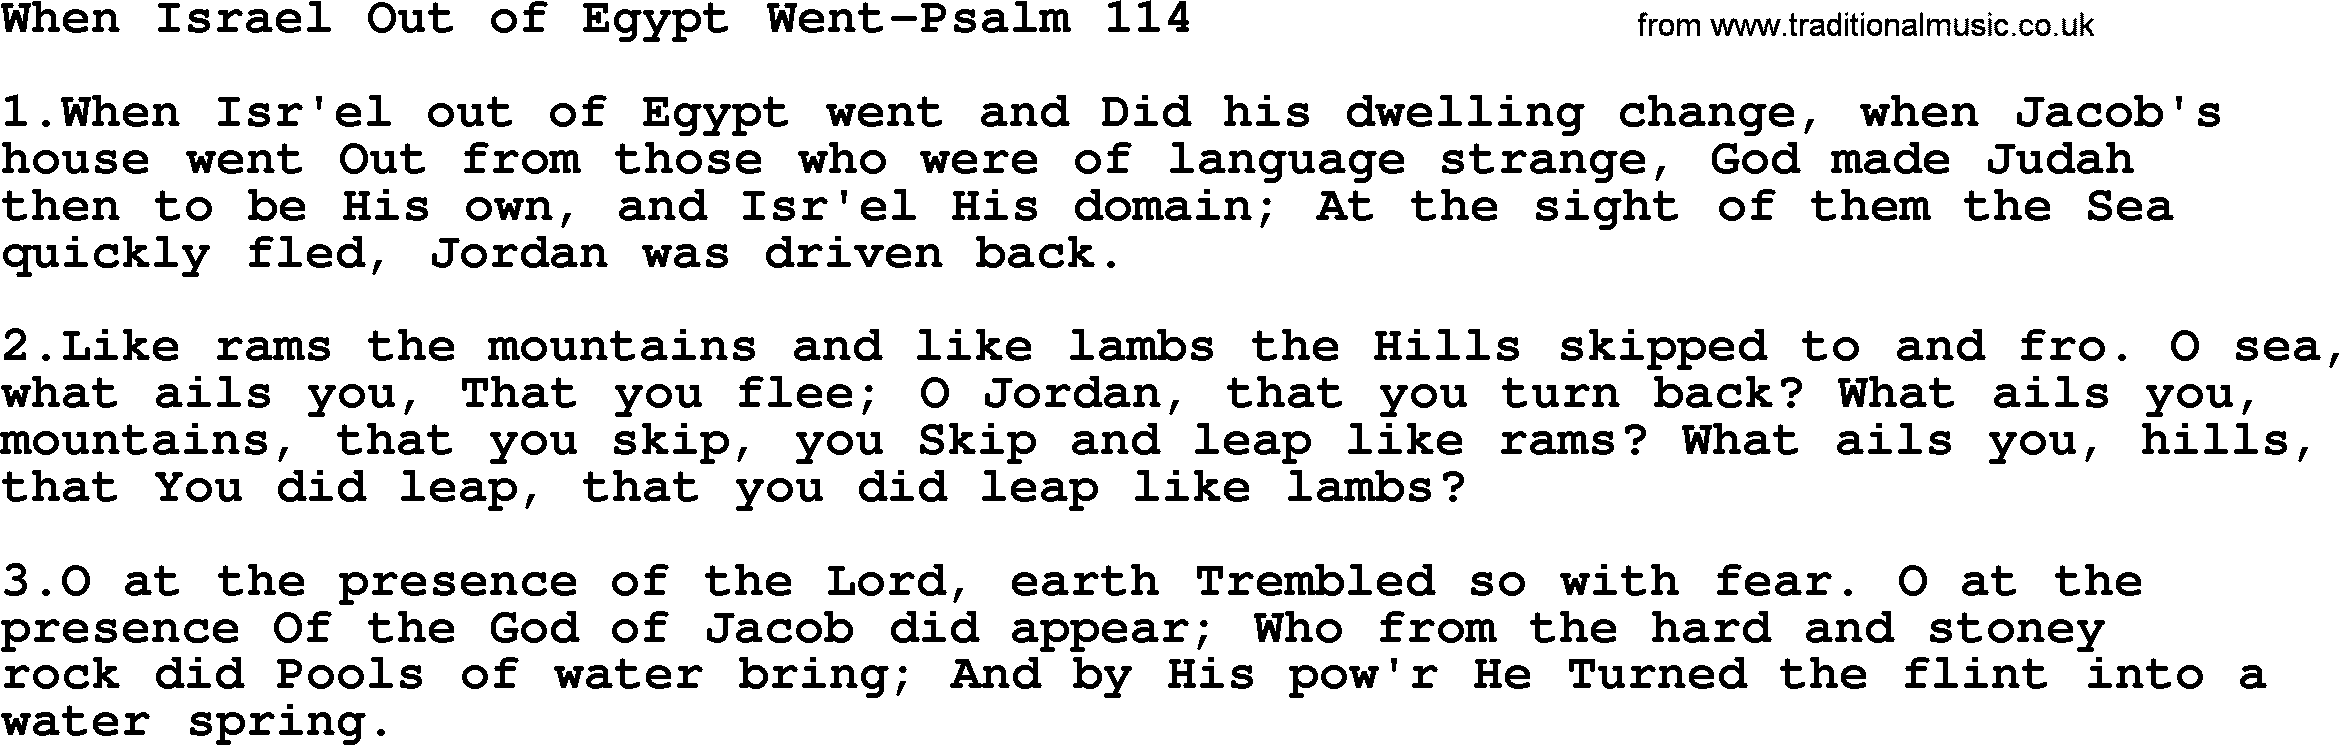 Hymns from the Psalms, Hymn: When Israel Out Of Egypt Went-Psalm 114, lyrics with PDF